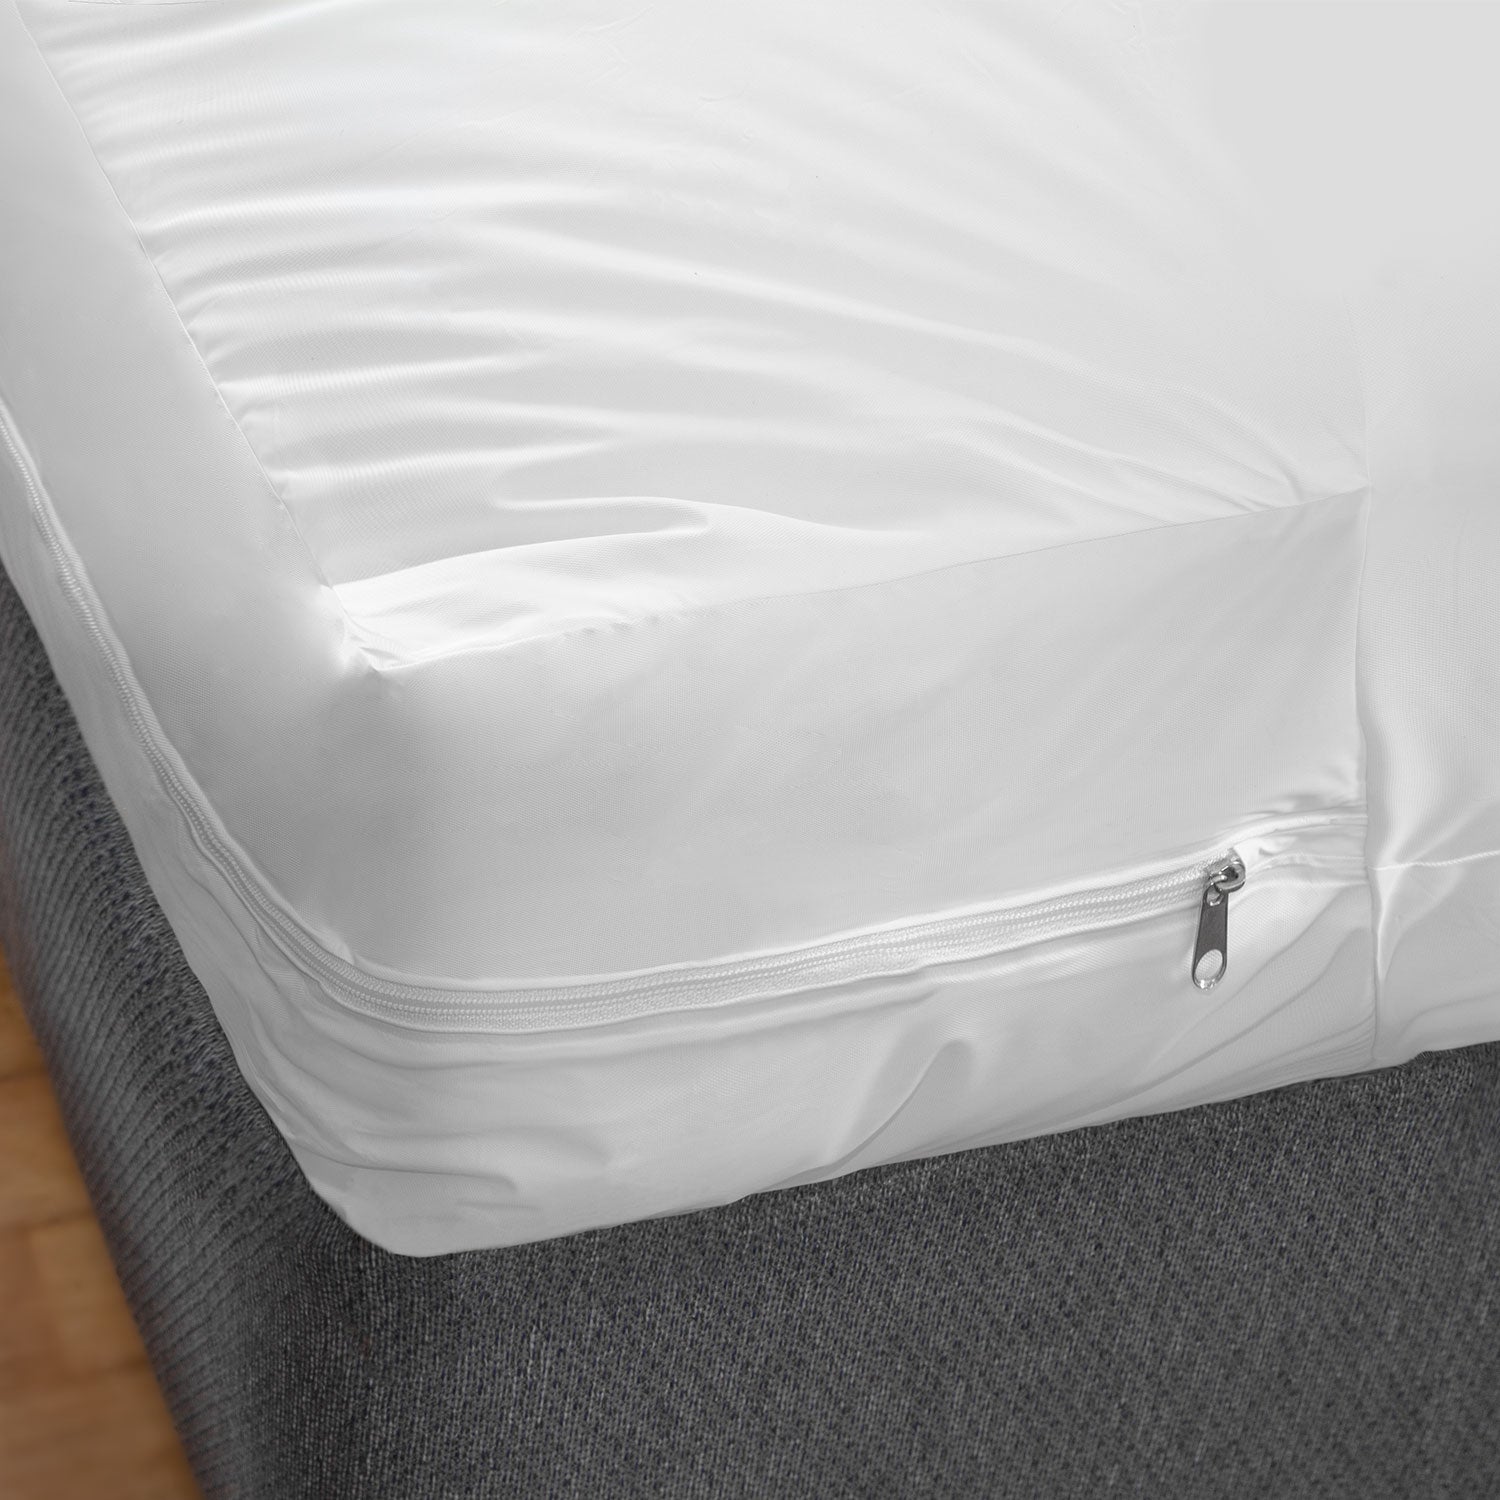 DMI Protective Mattress Cover for Beds AM-554-8068-1953